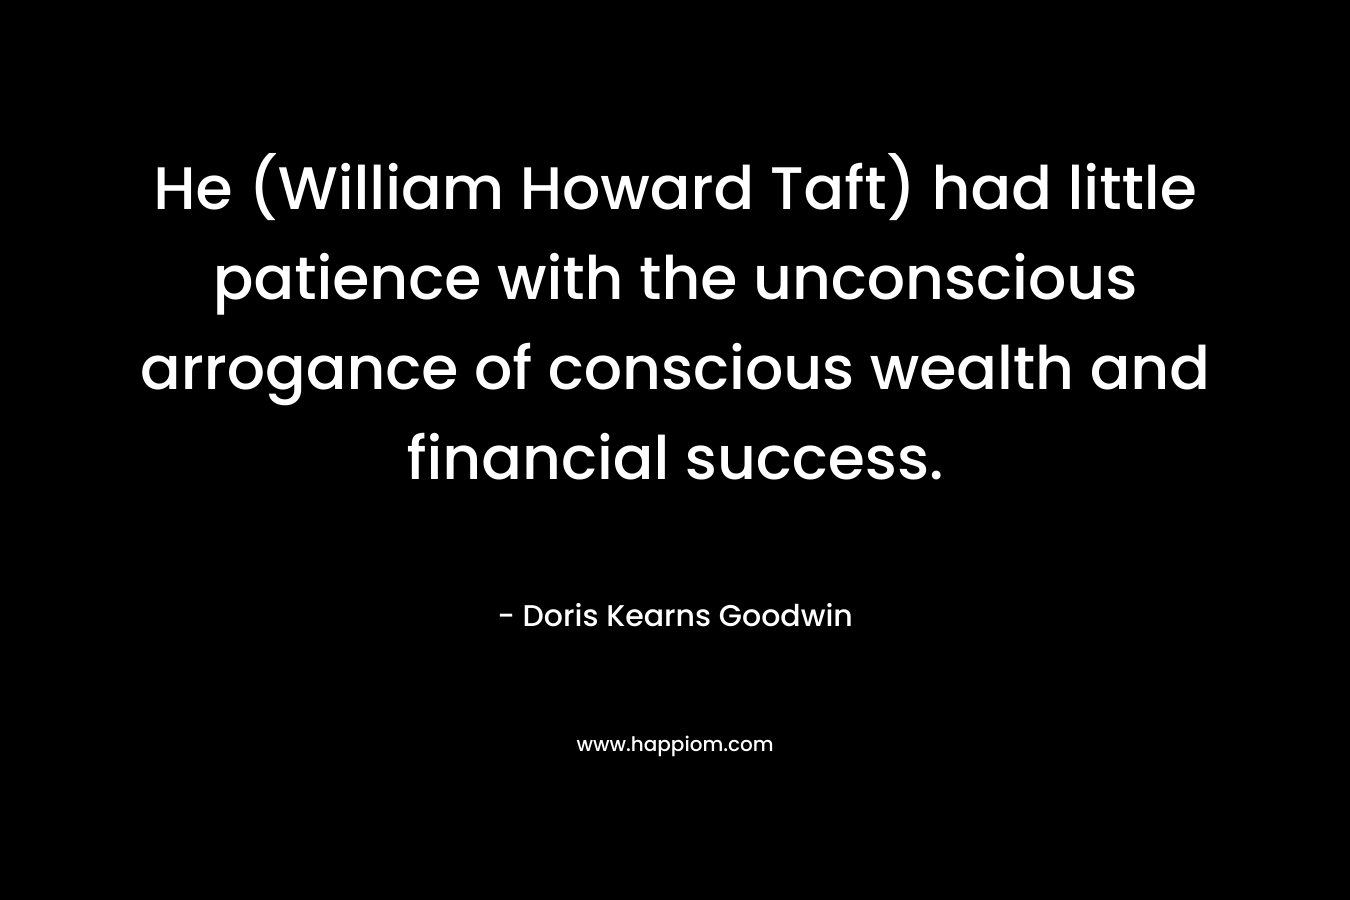 He (William Howard Taft) had little patience with the unconscious arrogance of conscious wealth and financial success. – Doris Kearns Goodwin